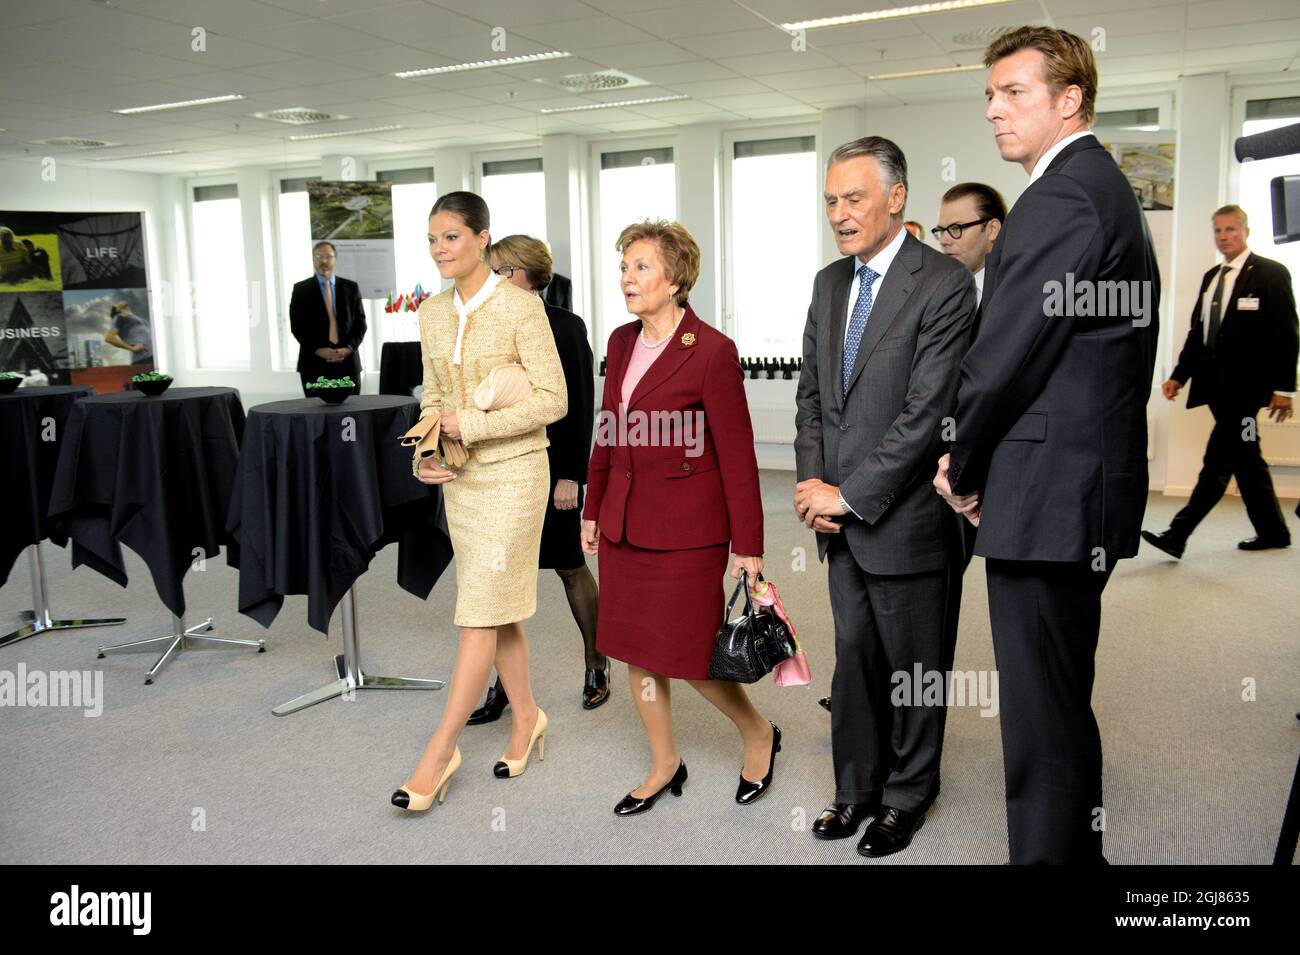 LUND 2013-10-03 Crown Princess Victoria, Maria Cavaco Silva, President Anibal Cavaco Silva and Prince Daniel are seen during a visit to Ideon Gateway in Lund, Sweden, October 3, 2013. The Crown Princess couple accompanied President Anibal Cavaco Silva and his wife Maria. The Ideon Gateway is a model for building a city part designed for research and innovation. The President of Portugal is on a State visit to Sweden. Foto: Ludvig Thunman / TT / Kod 10600  Stock Photo